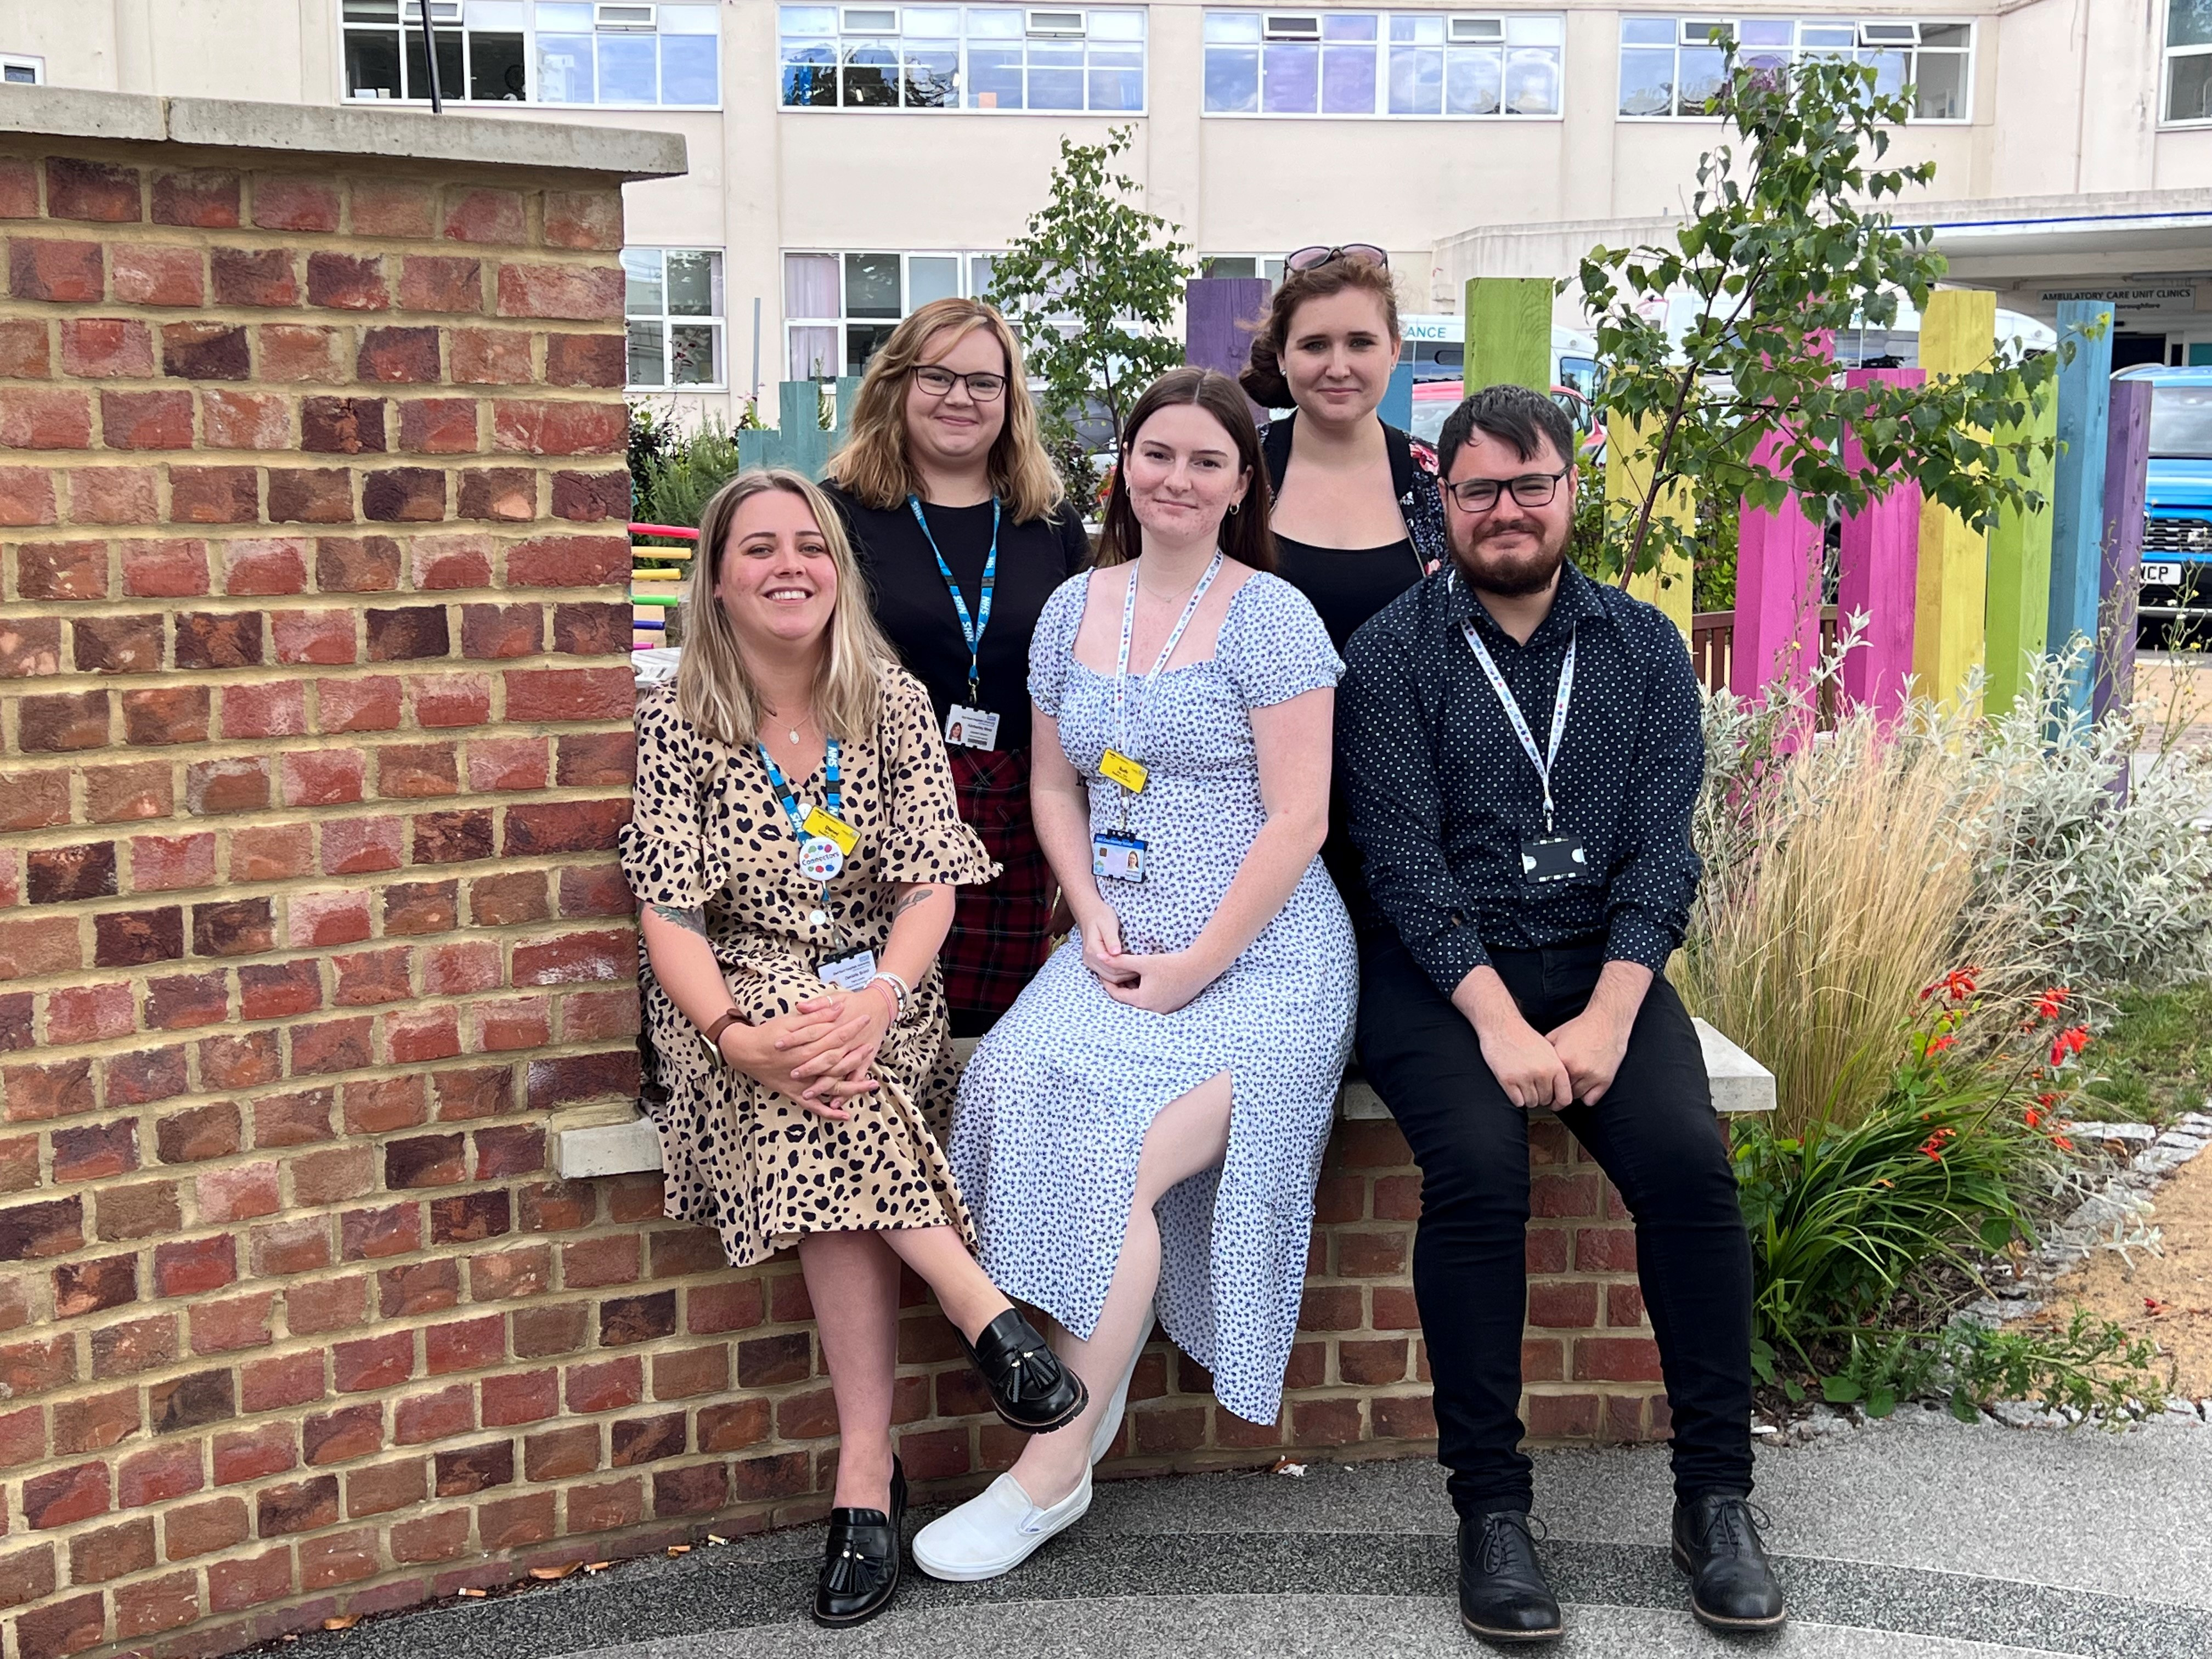 The team who will take on the million steps challenge. Image shows five people in a garden area, three are sitting on a low wall